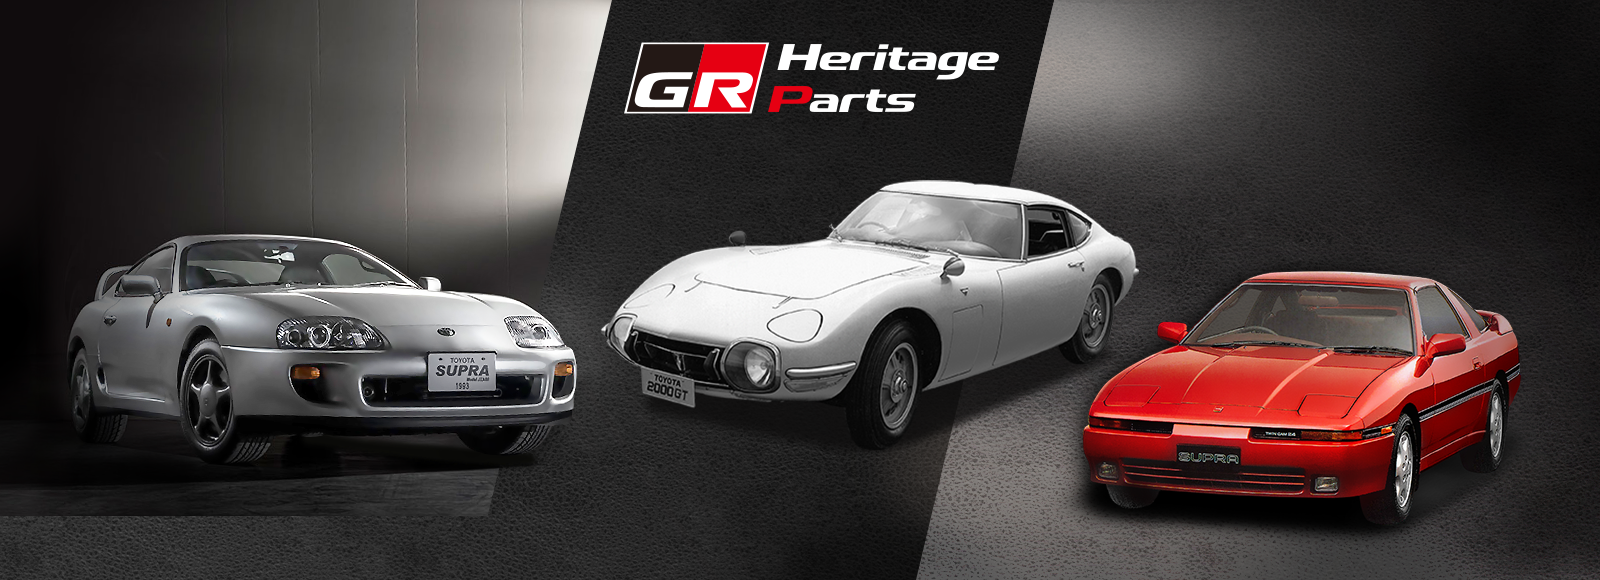 Heritage parts by Toyota Gazoo Racing